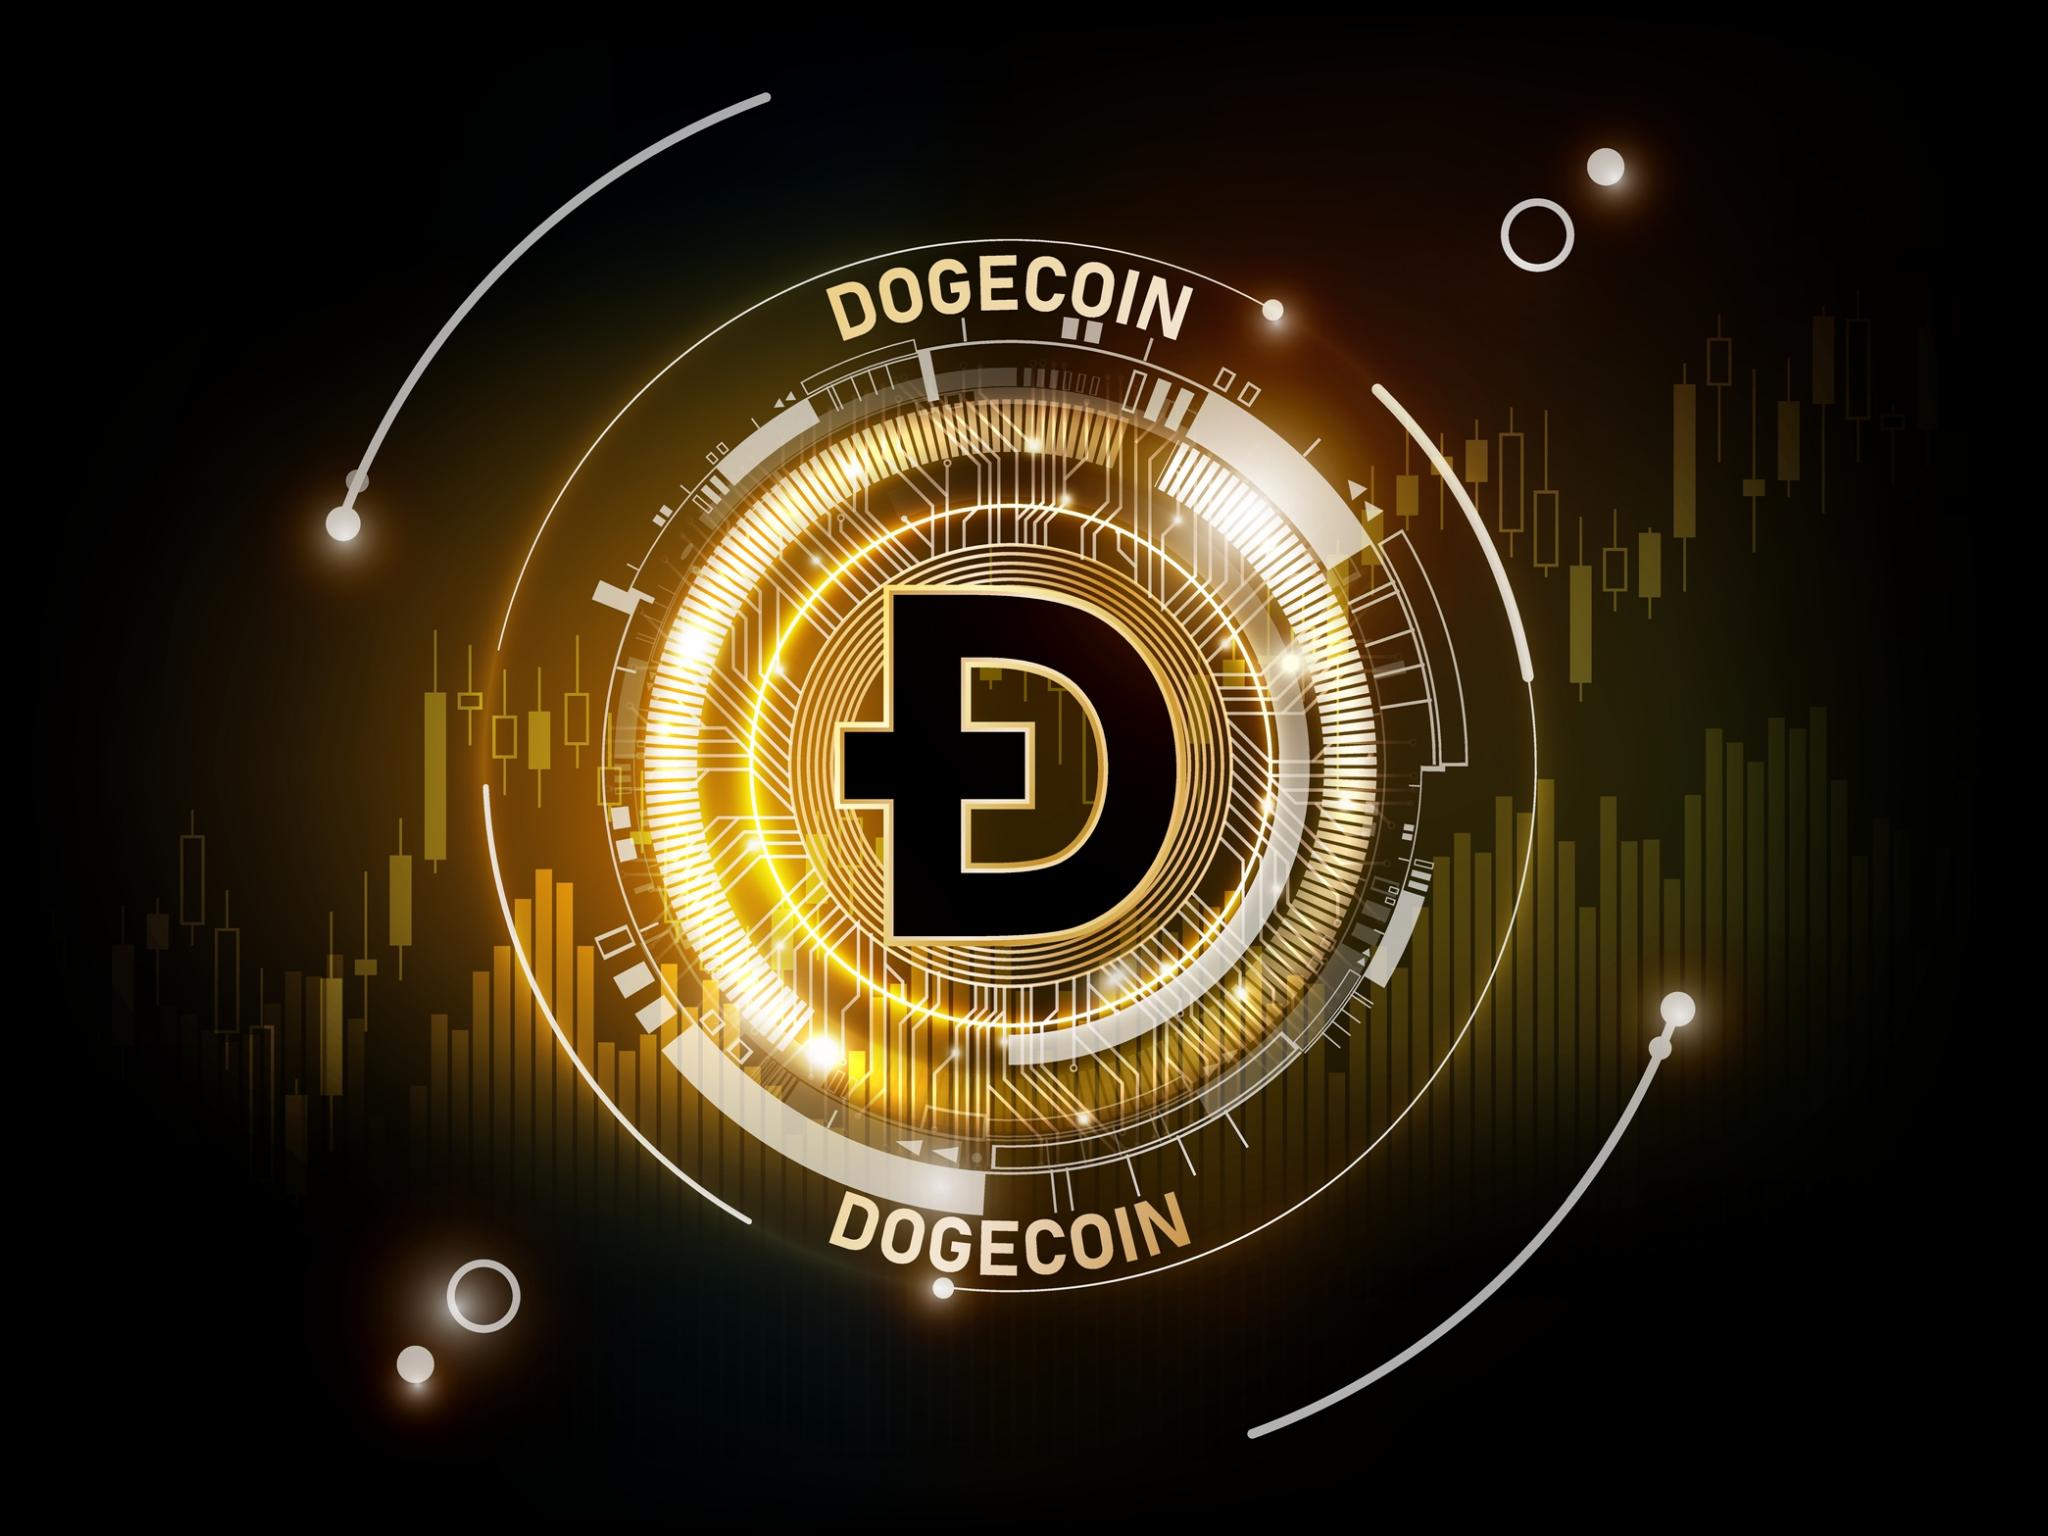  dogecoin-network-hit-by-critical-security-flaw-last-year--developer-urges-upgrade-after-fix 